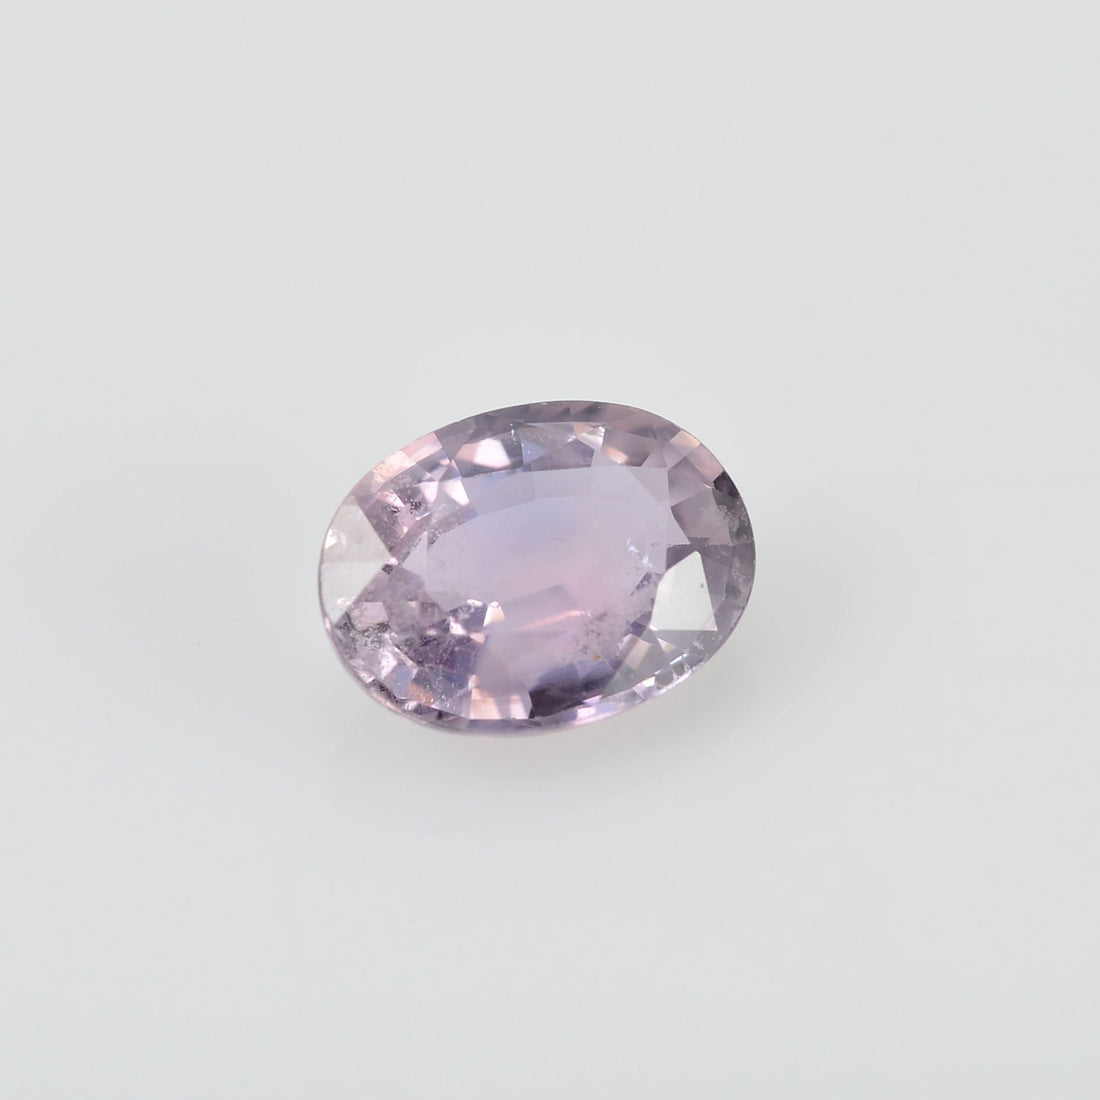 1.28 cts Natural Purple Sapphire Loose Gemstone Oval Cut